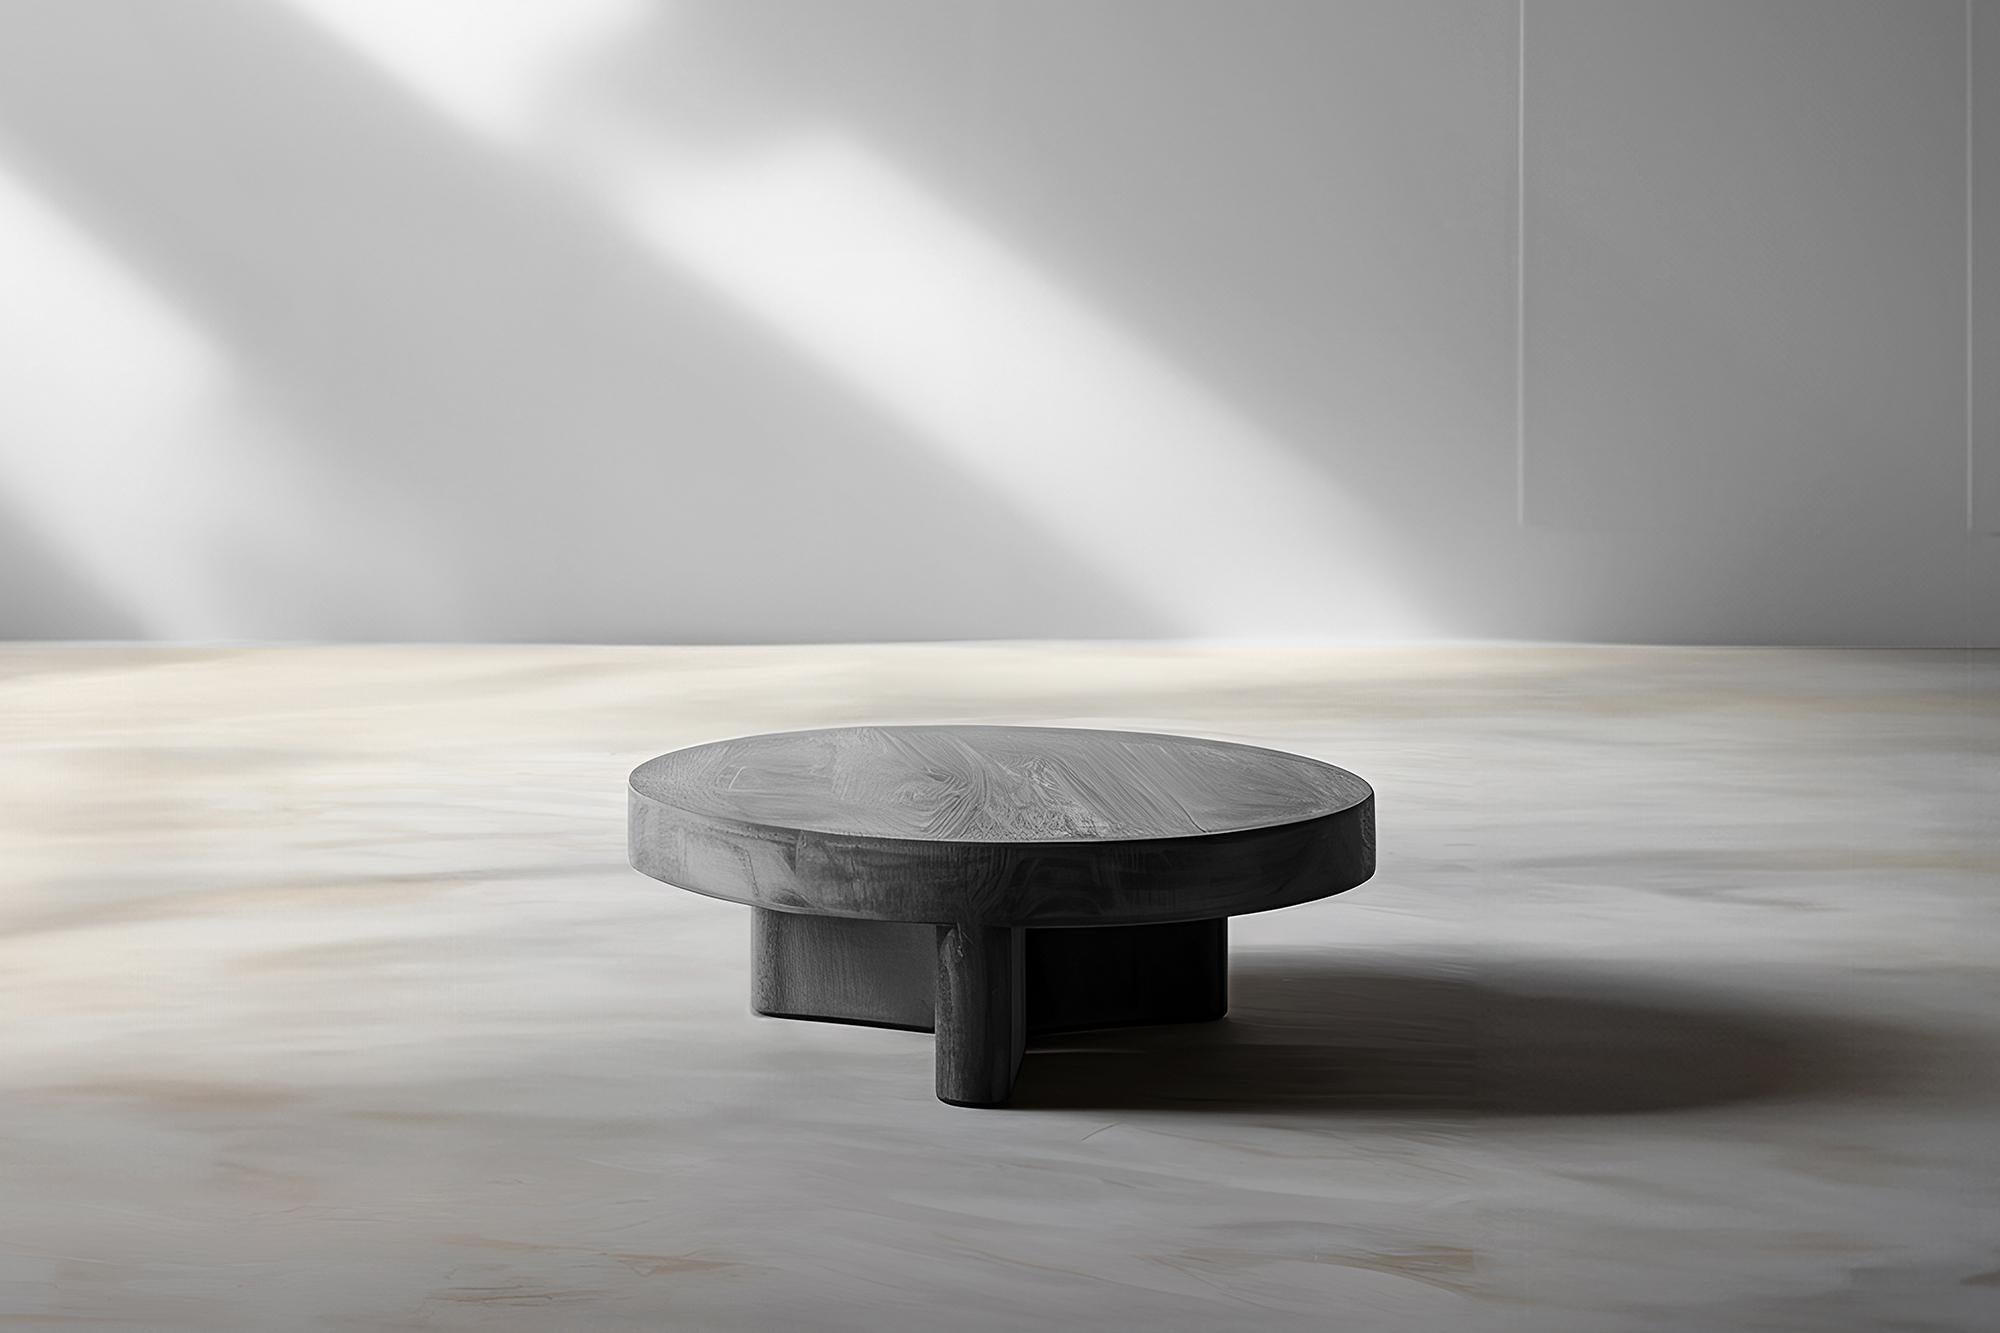 Round Top Fundamenta Coffee 59 Abstract Oak, Stylish Design by NONO

Sculptural coffee table made of solid wood with a natural water-based or black tinted finish. Due to the nature of the production process, each piece may vary in grain, texture,